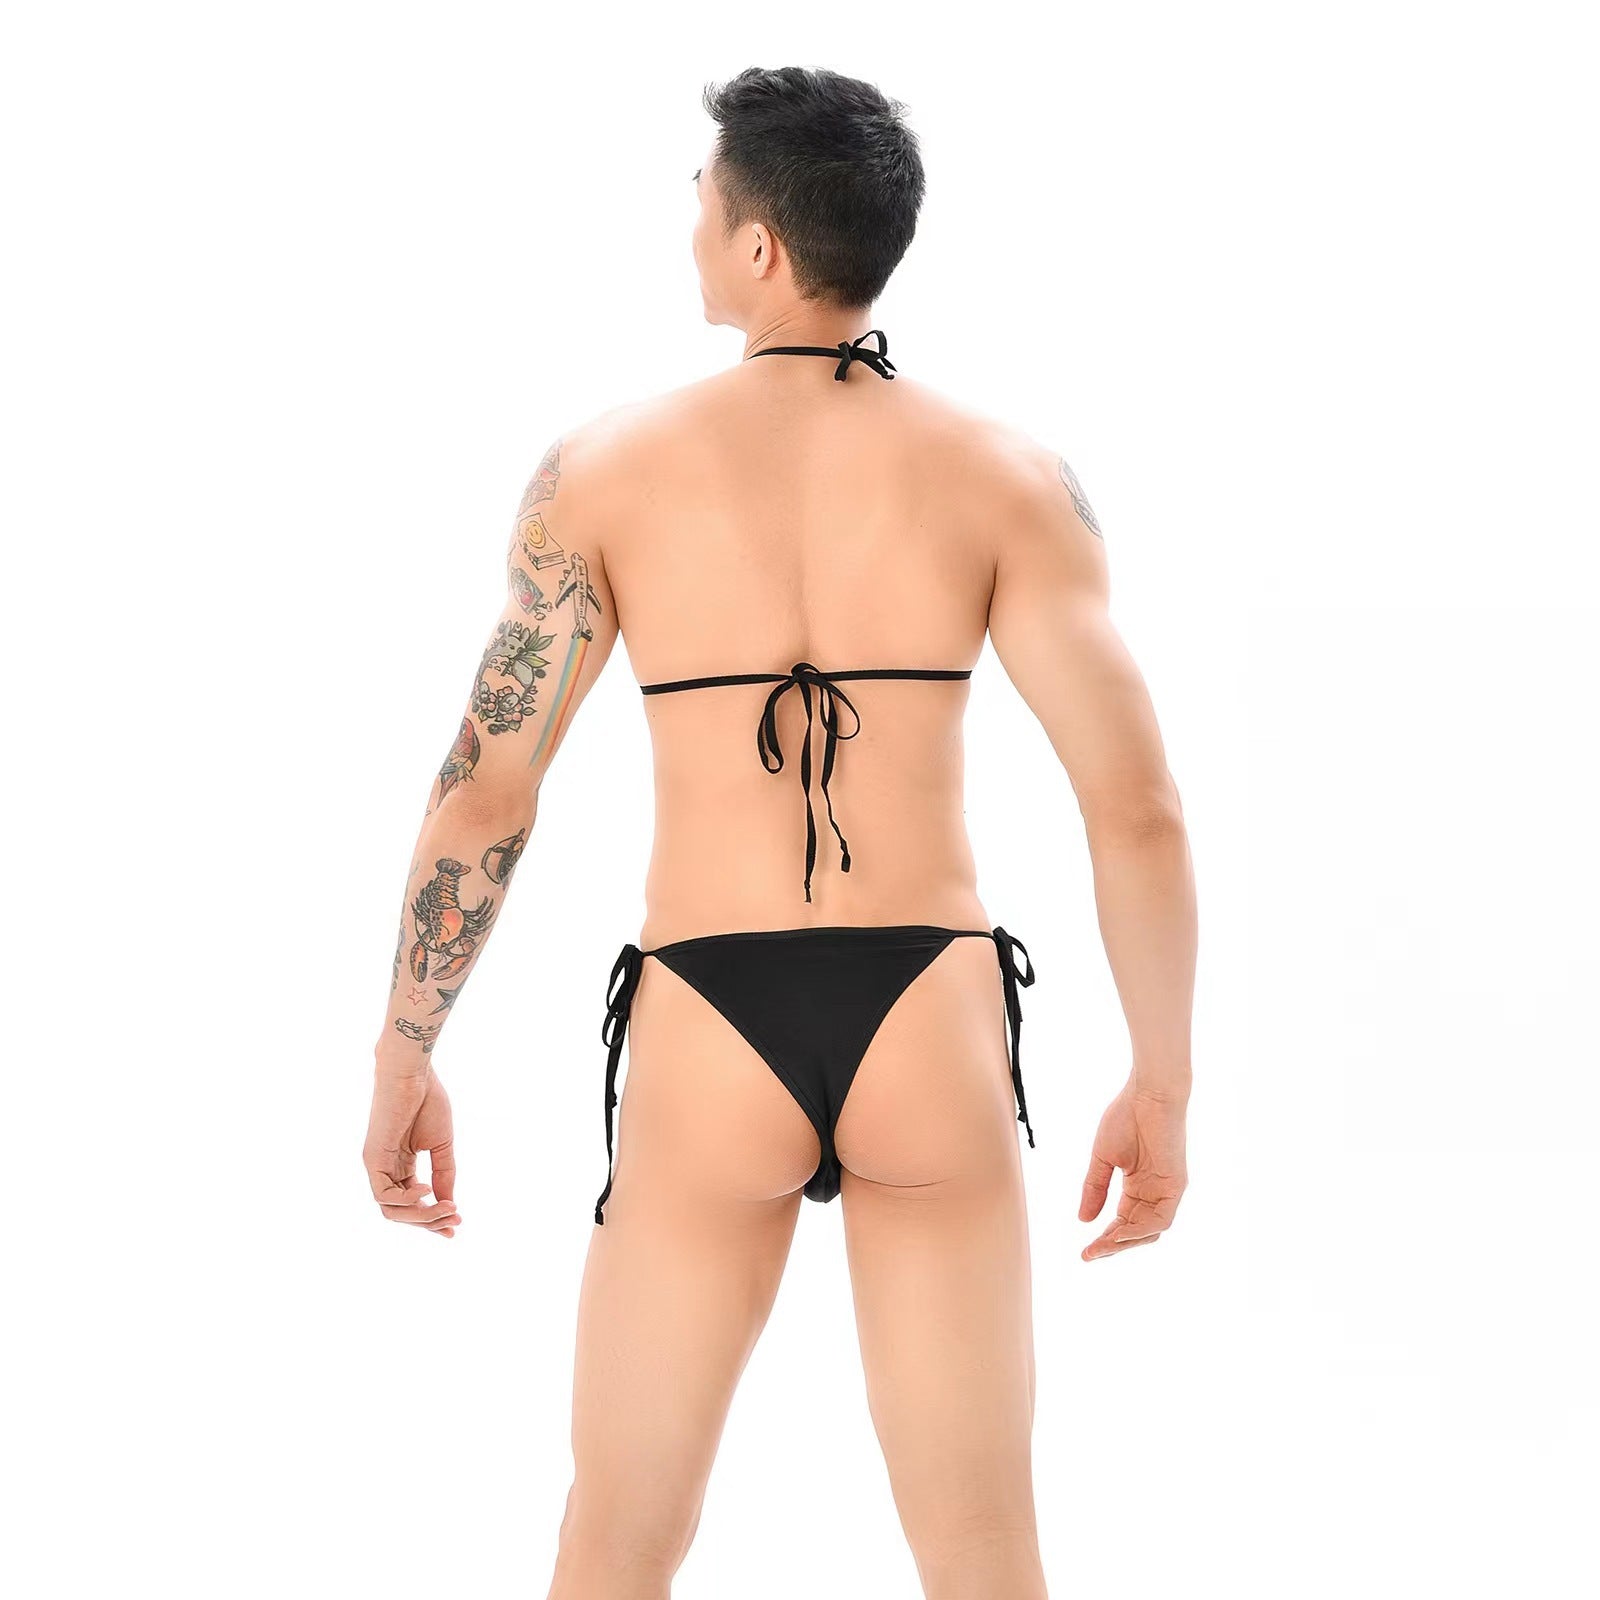 Men's 2pcs Sissy Sexy Lace Bra and Thong Set(Four Colors Available)